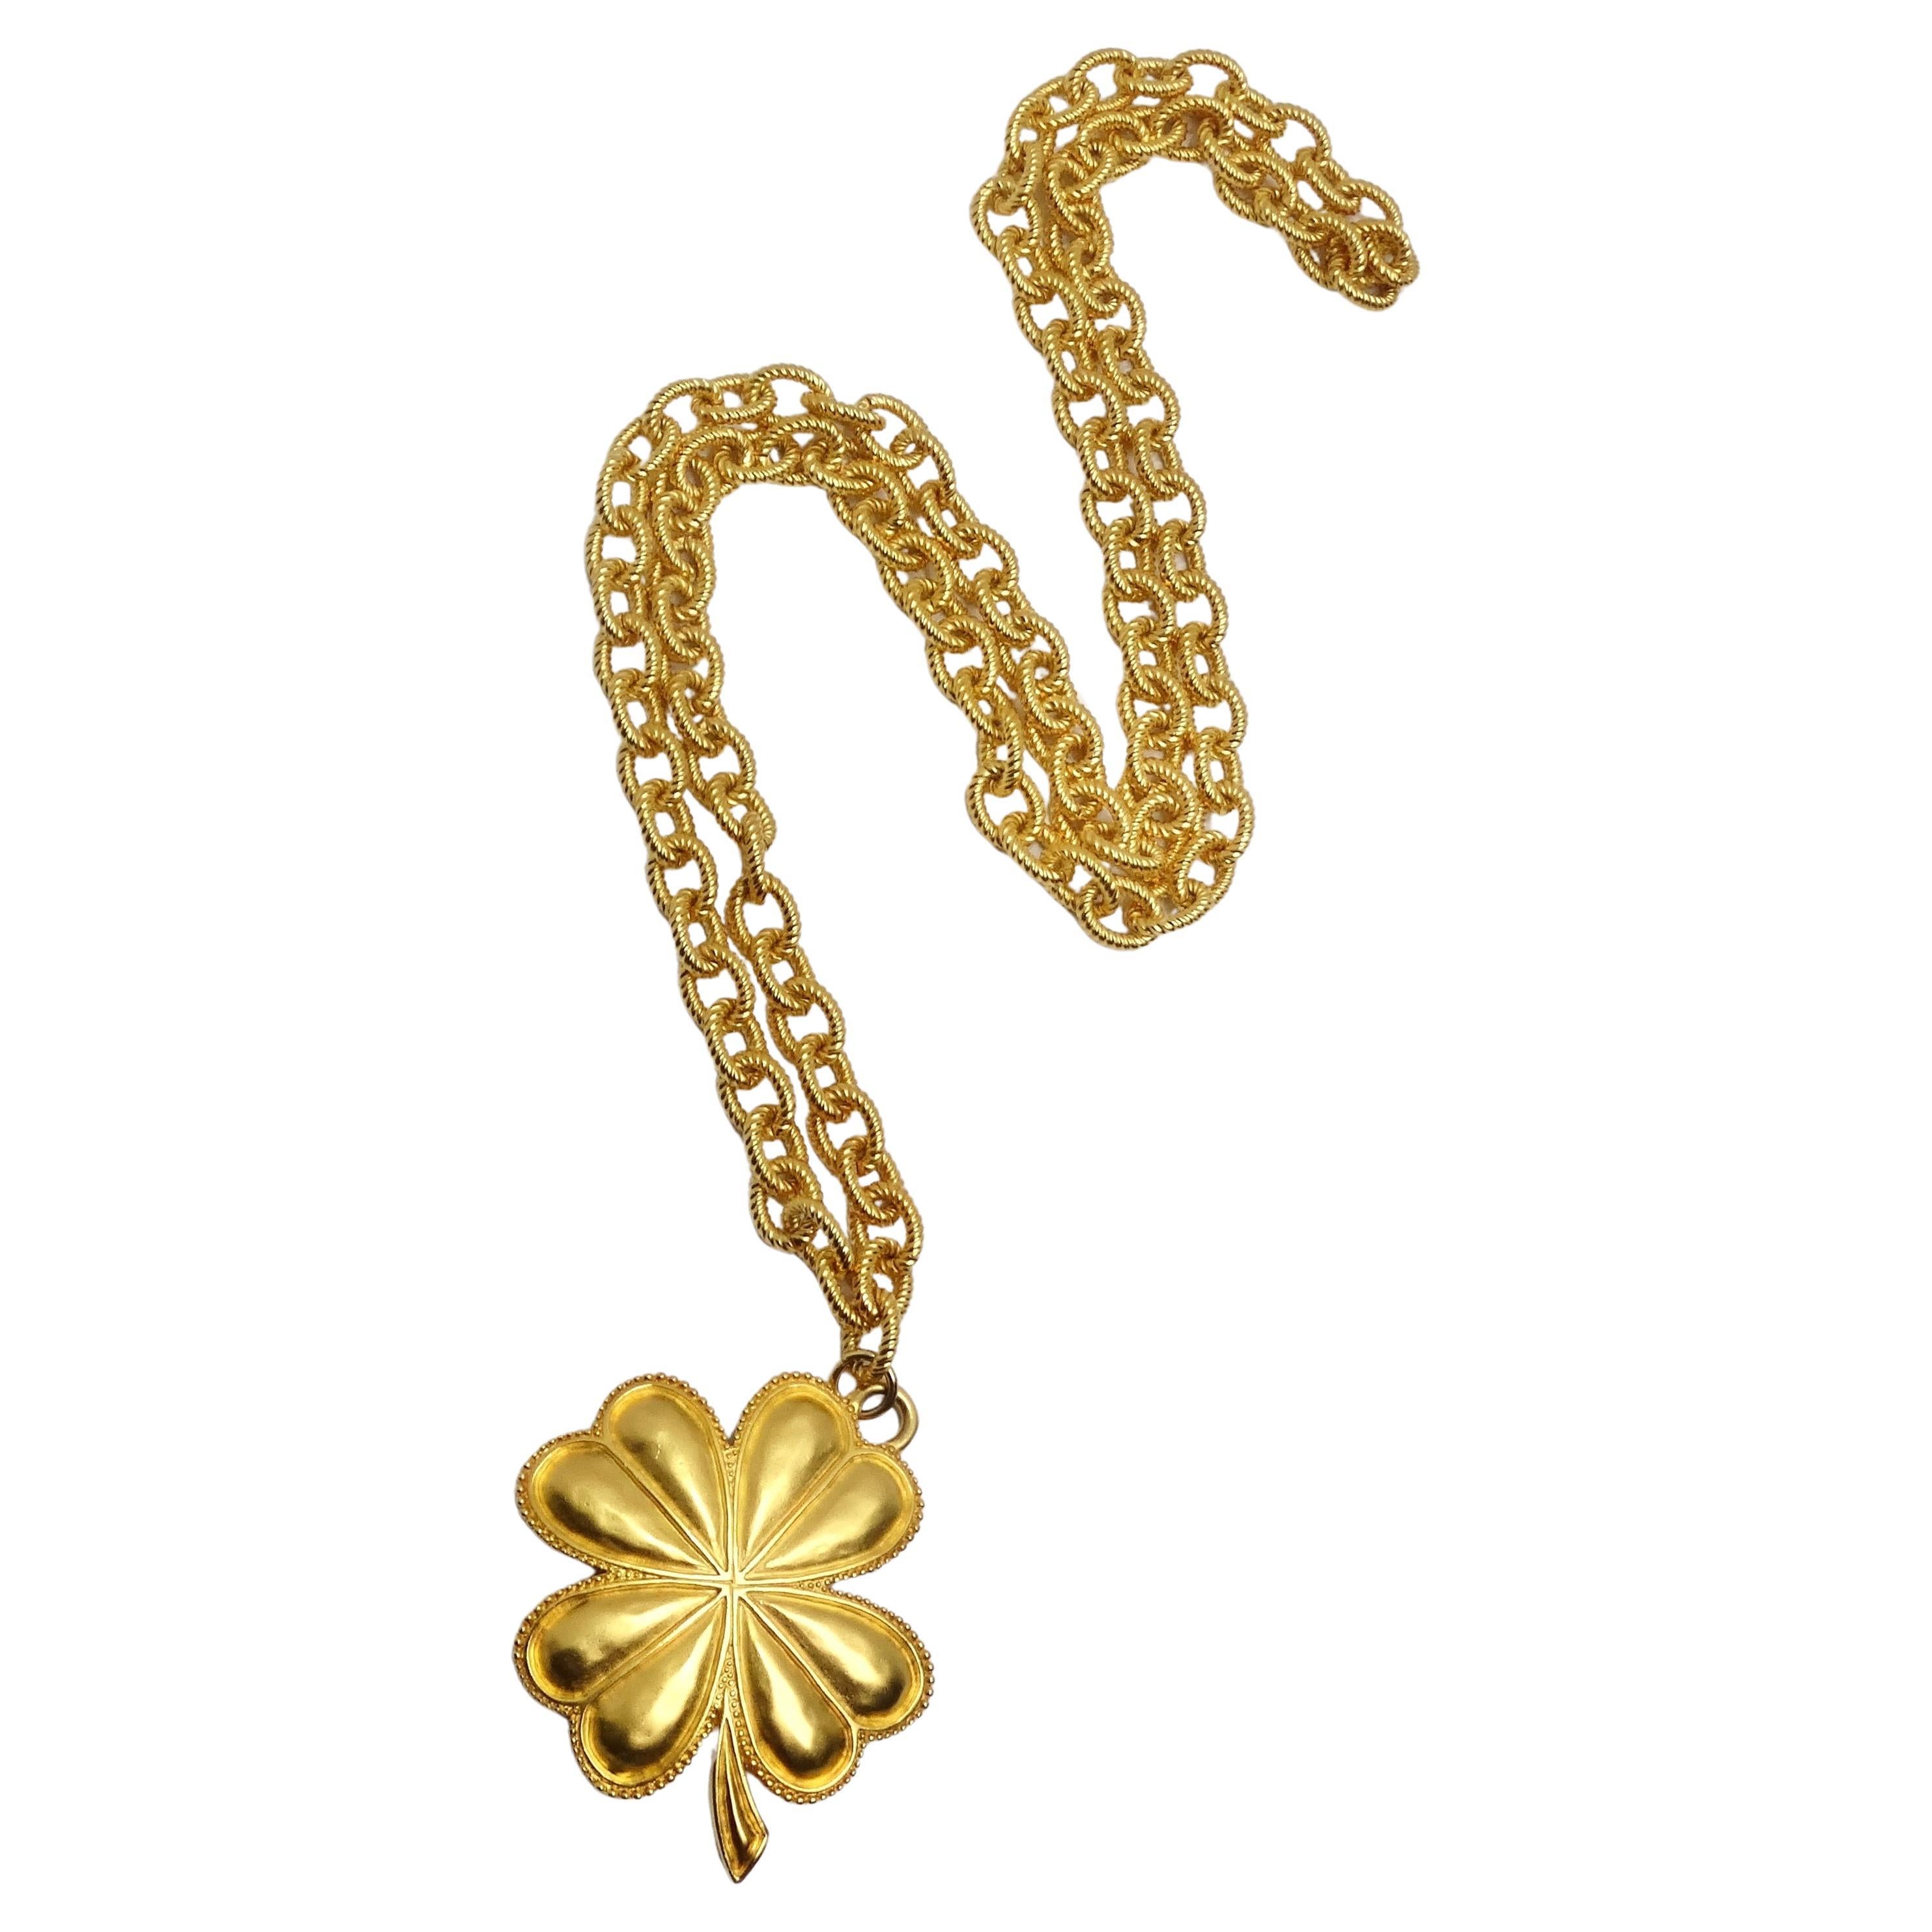 Karl Lagerfeld 1980s Gold Plated Shamrock Pendent Necklace